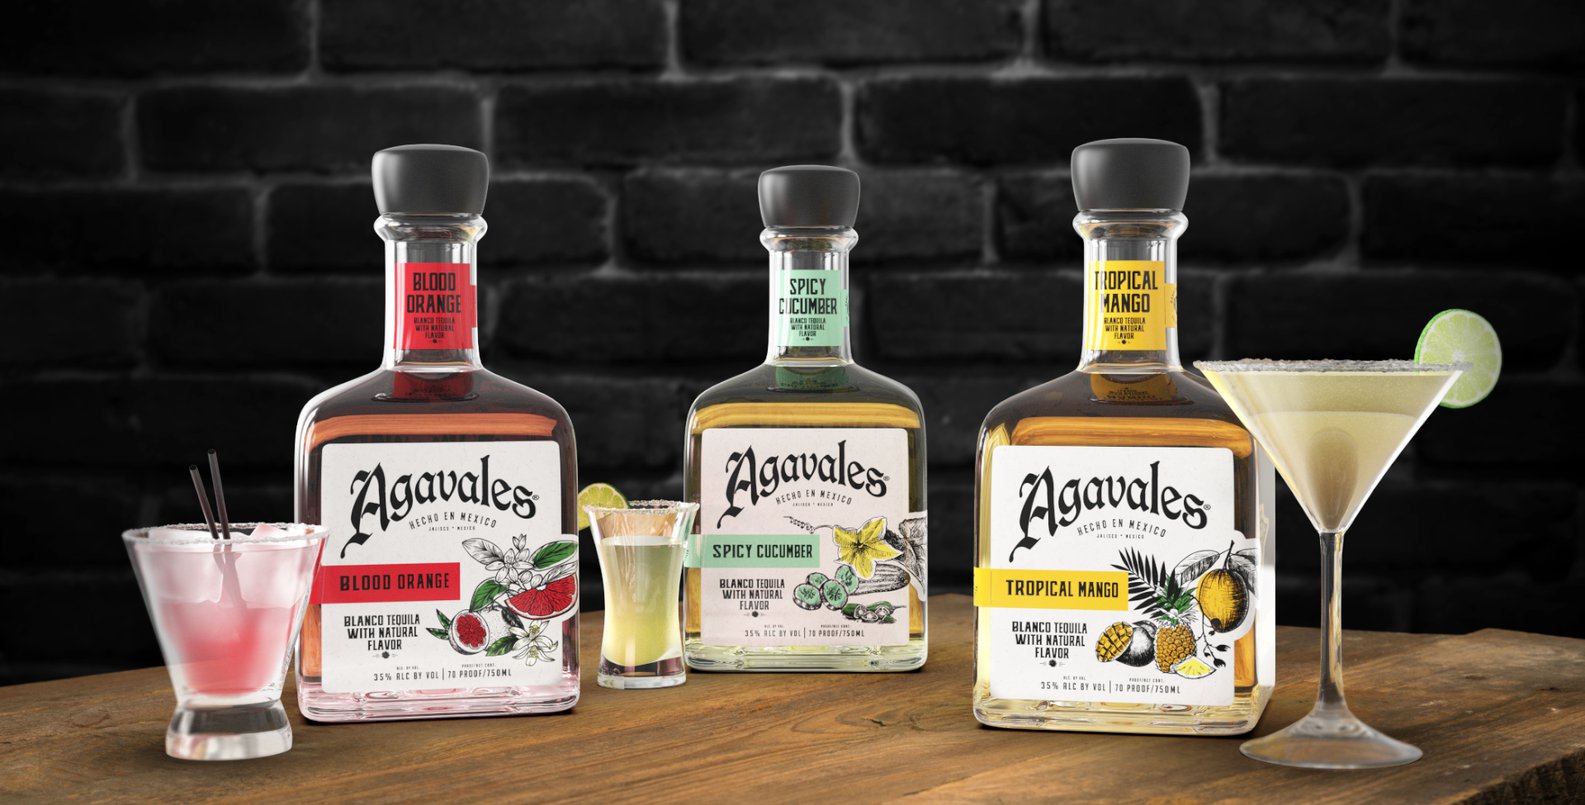 Agavales flavored tequila header image